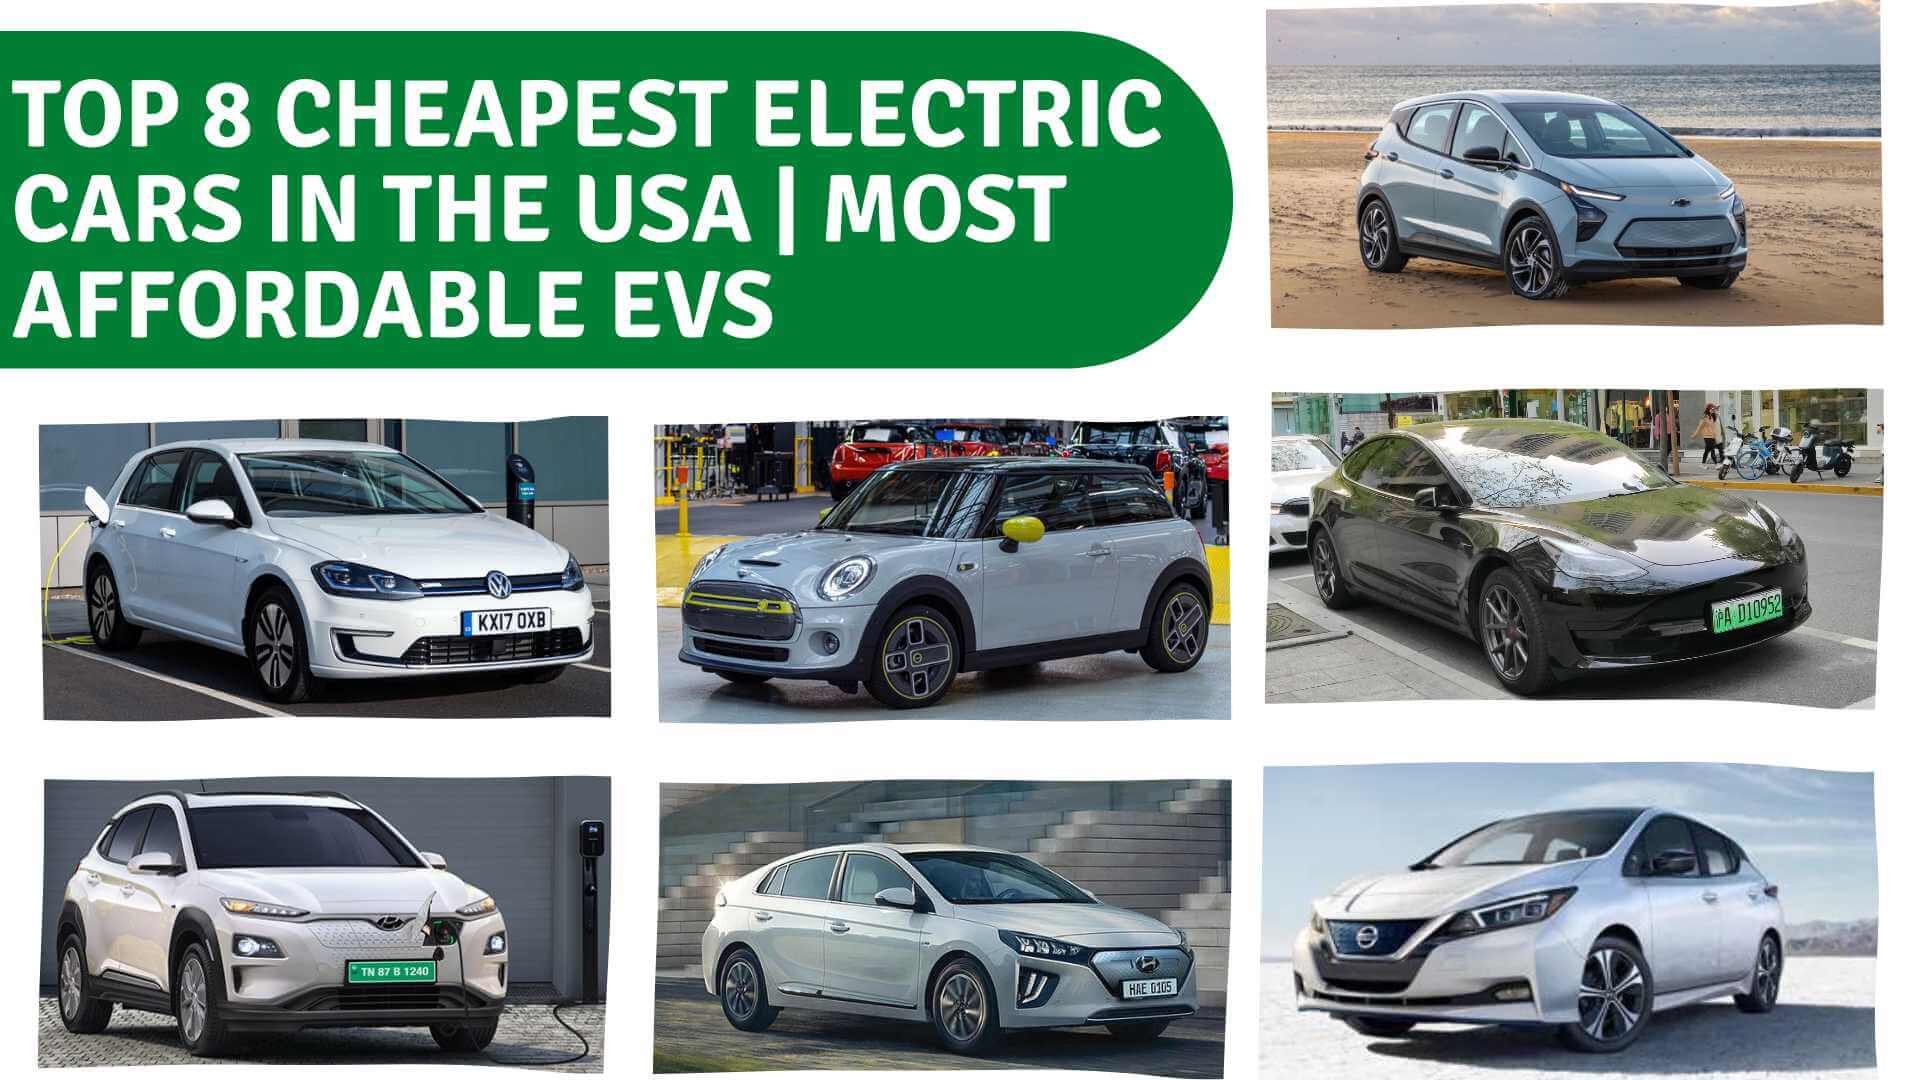 https://e-vehicleinfo.com/top-8-cheapest-electric-cars-in-the-usa/